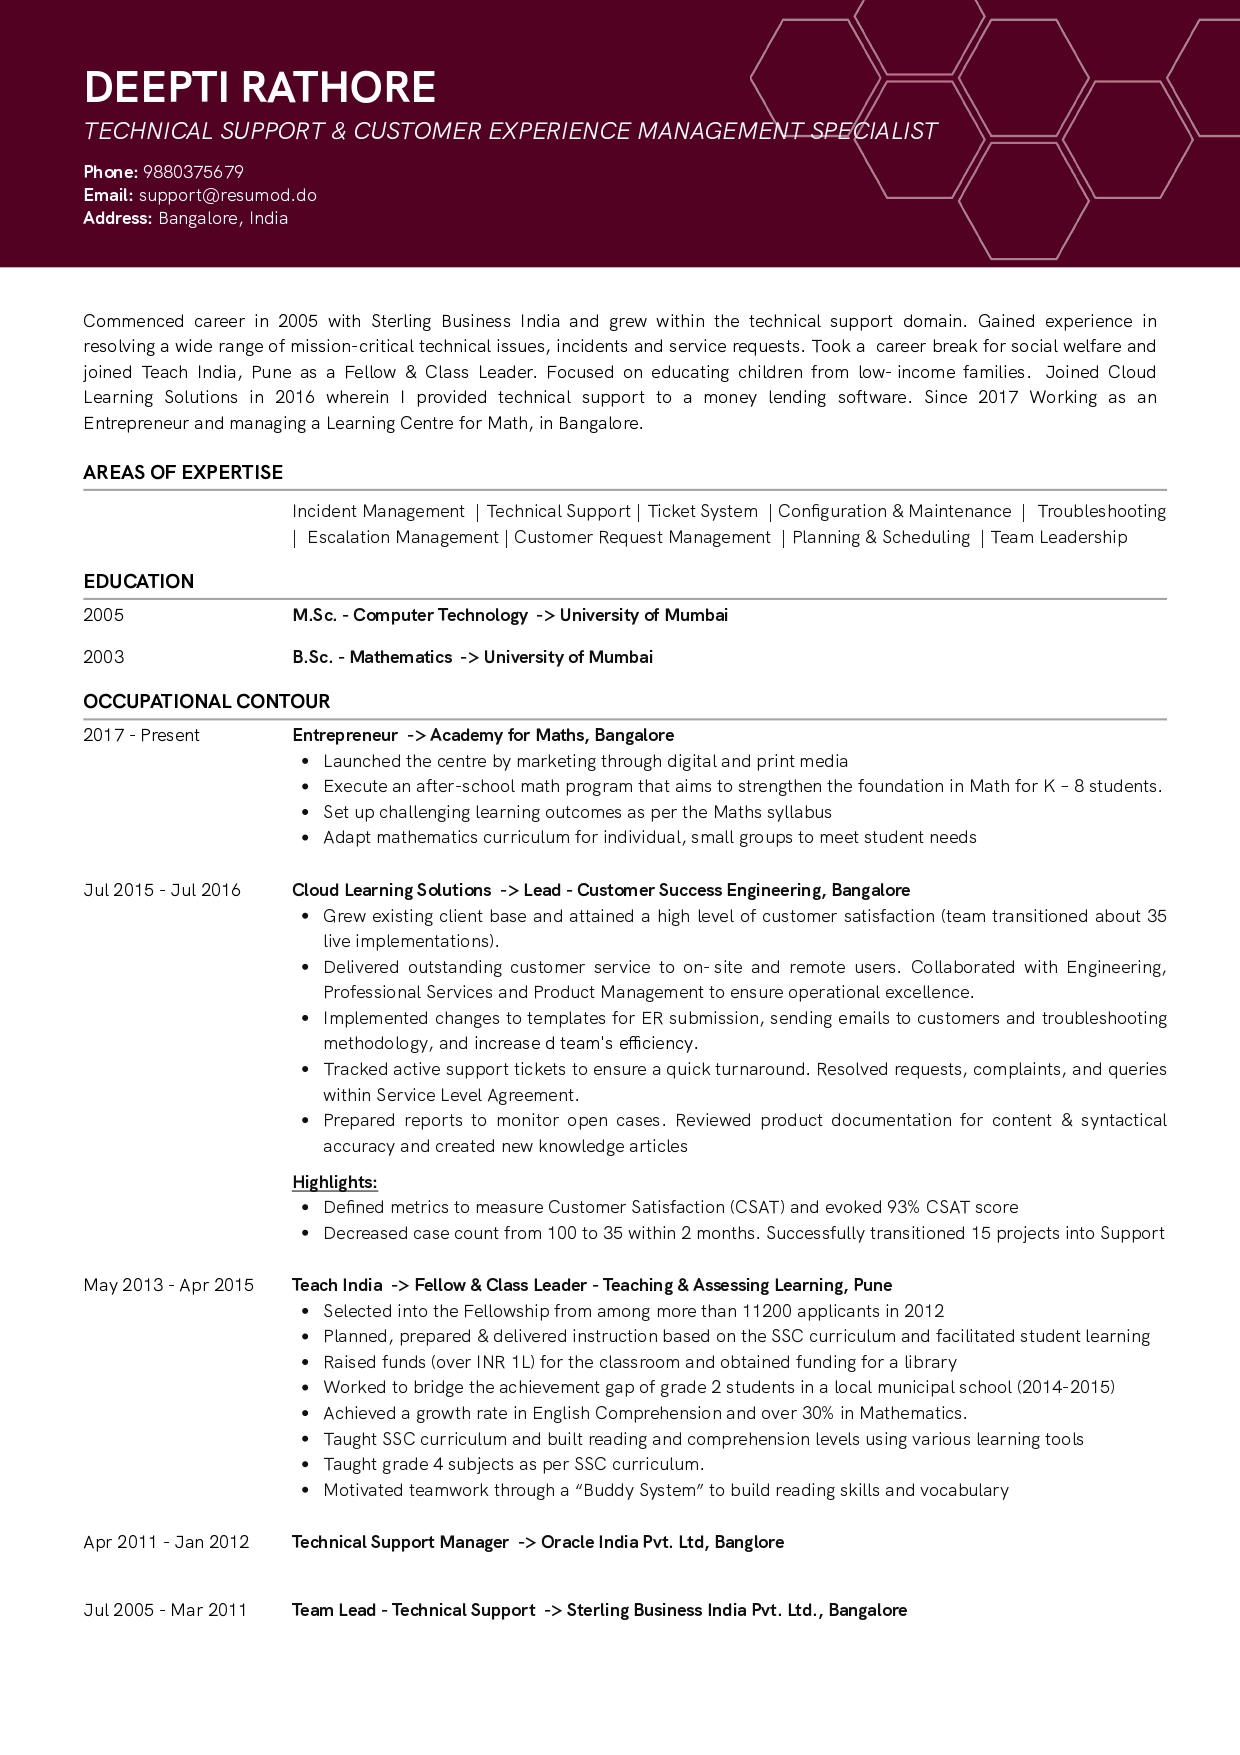 Resume of Technical Support and Customer Success Manager with Career Break